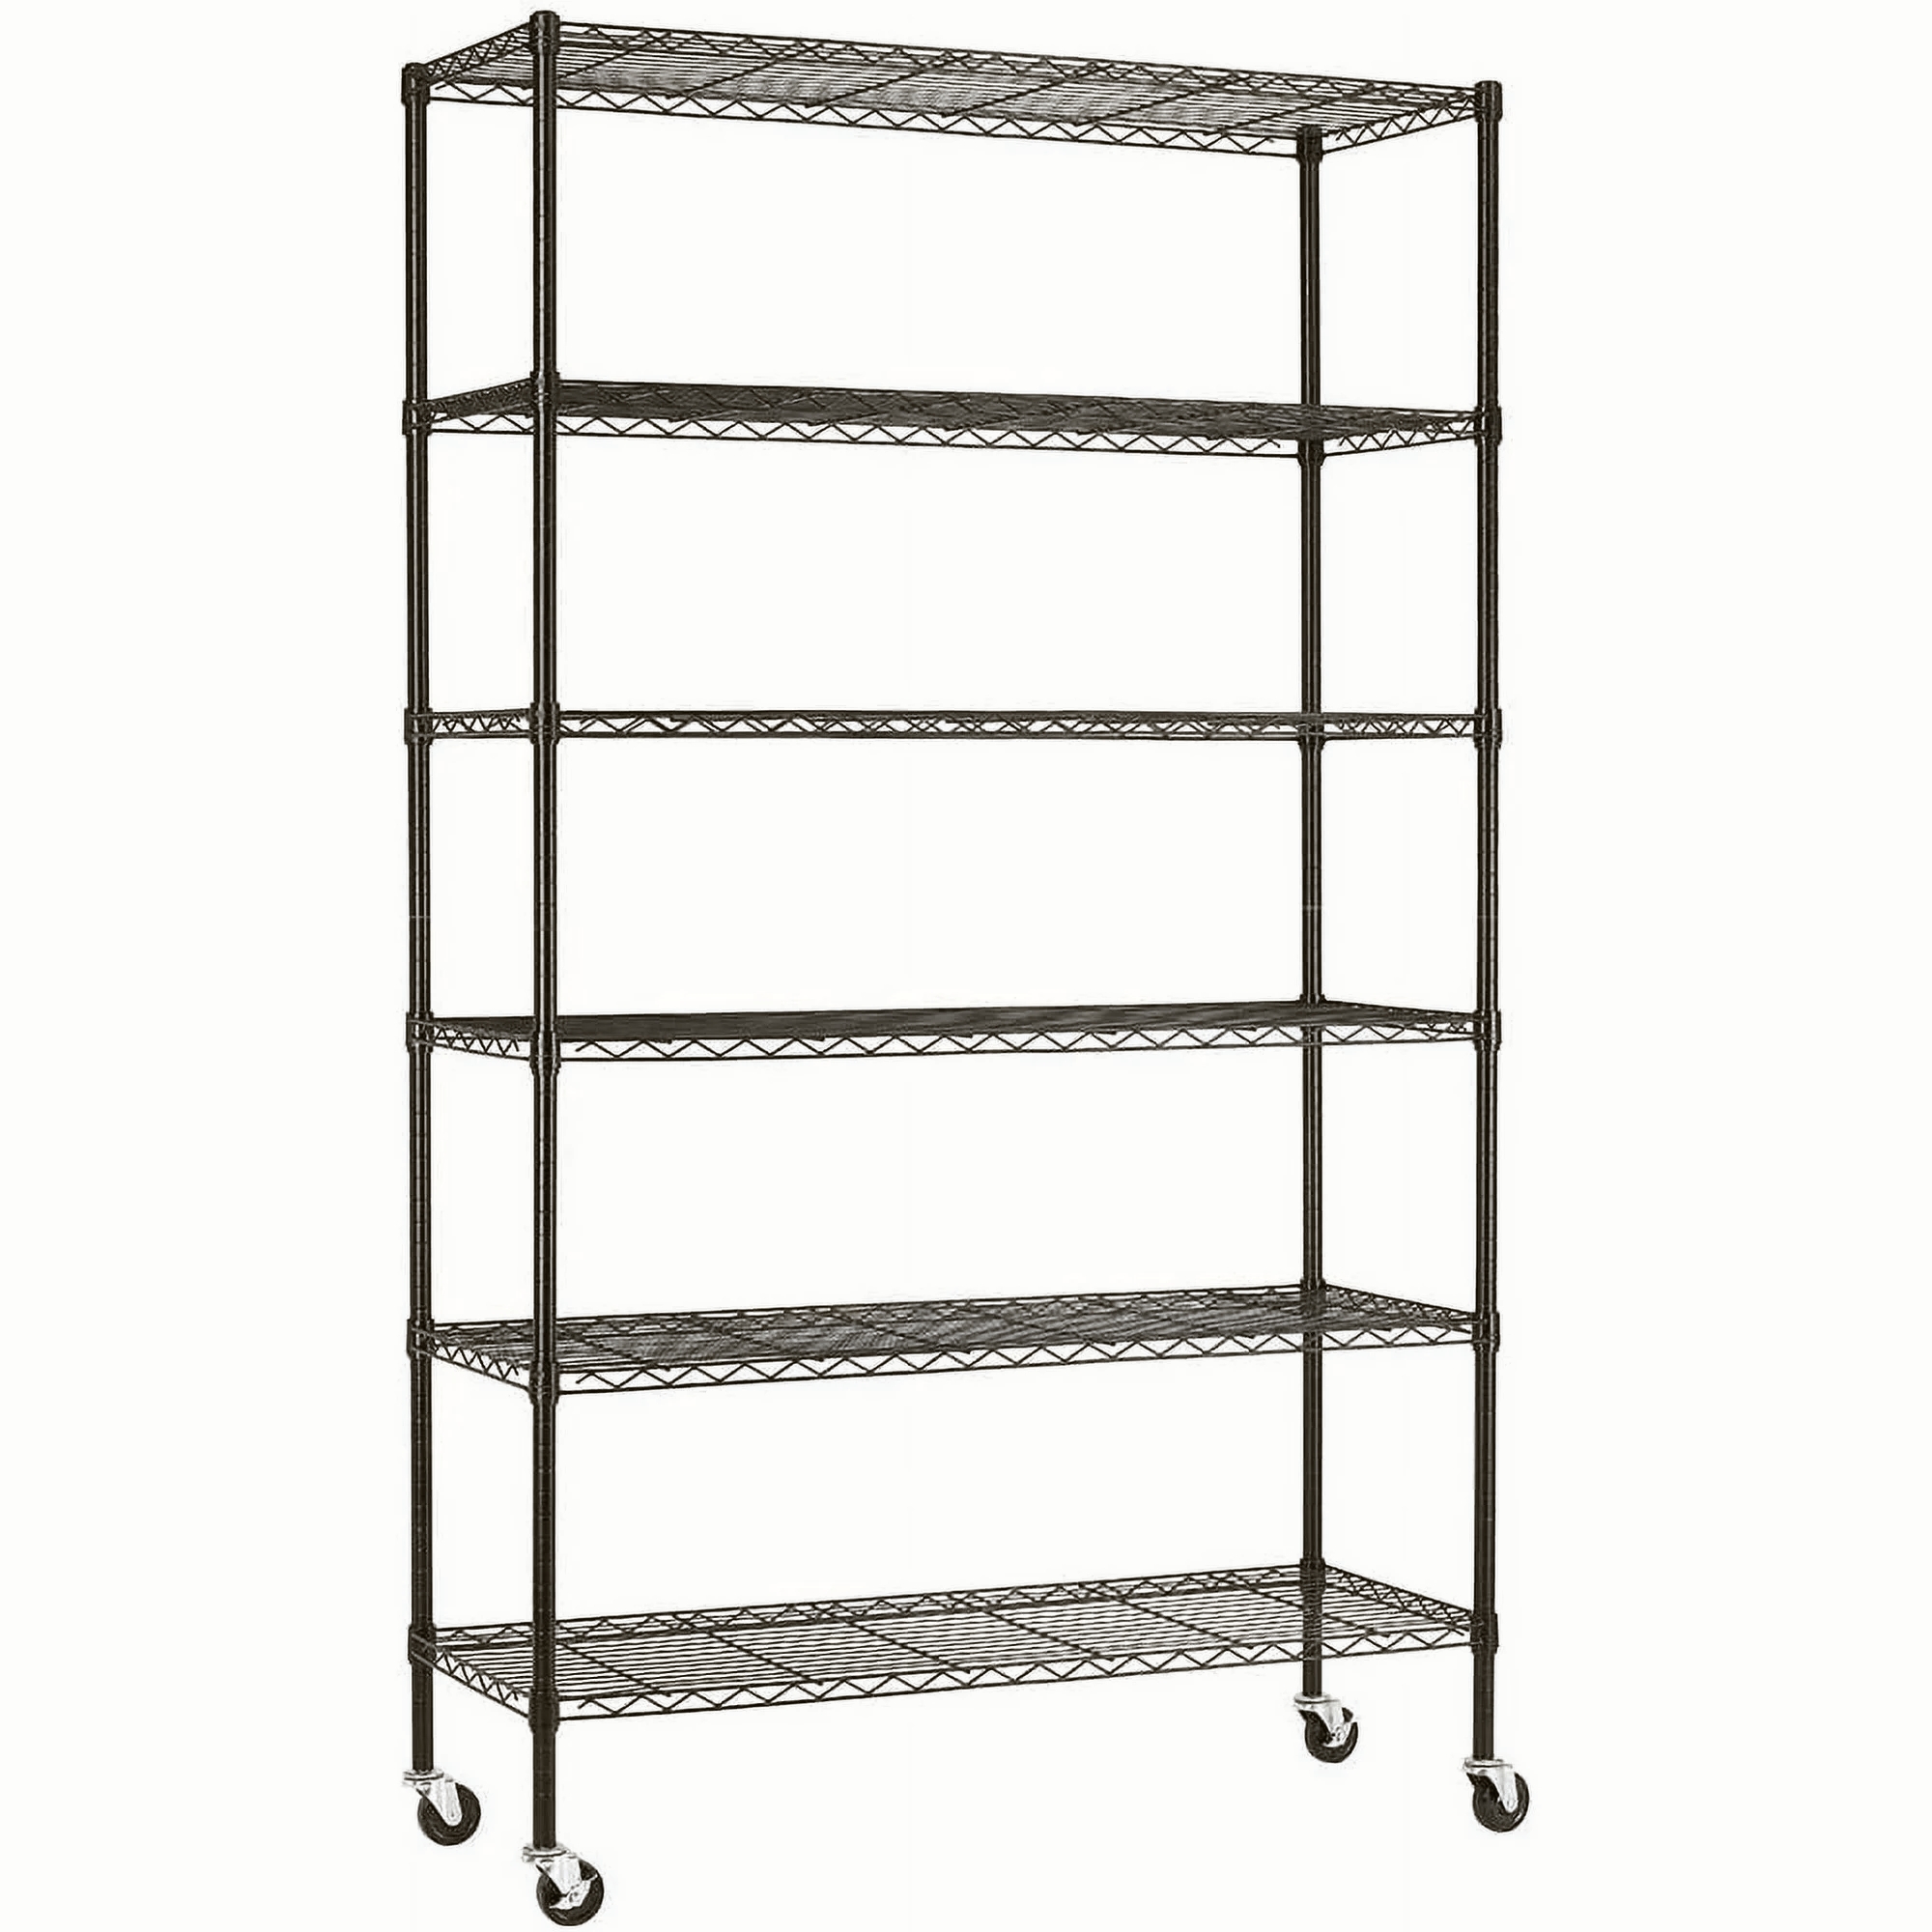 BestOffice 6 Tier Wire Shelving Unit with Wheels 2100LBS Capacity-18x48x82 $99.99